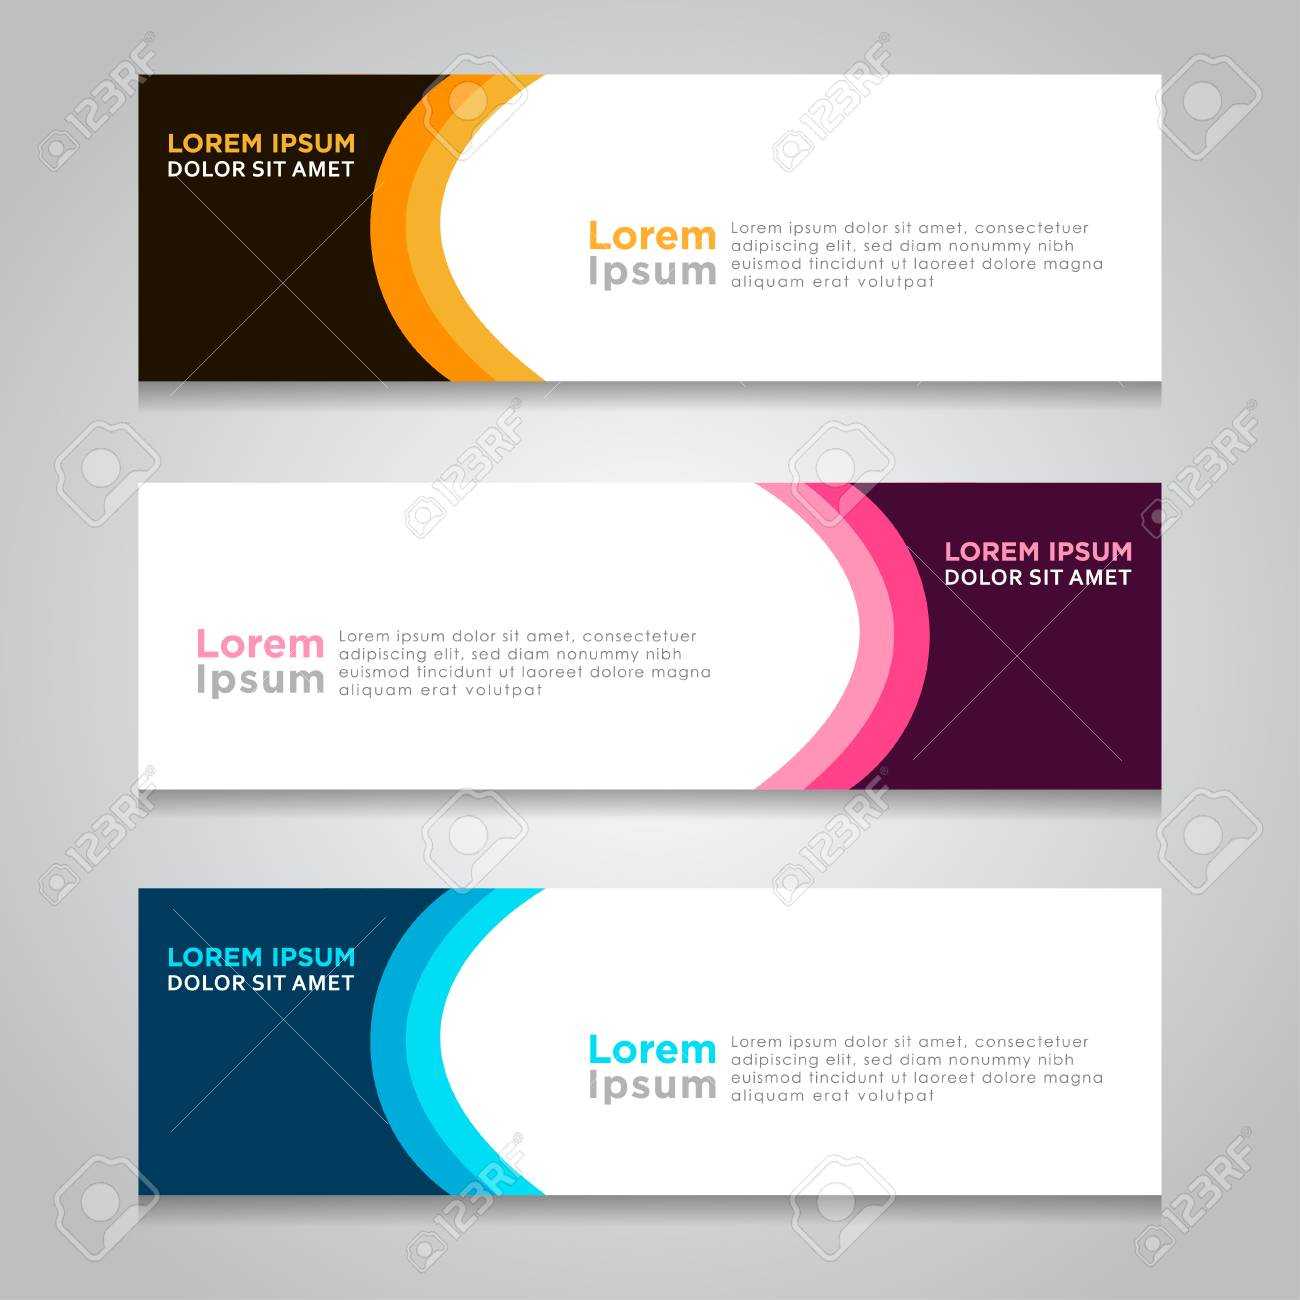 Abstract Web Banner Design Background Or Header Templates Pertaining To Website Banner Design Templates